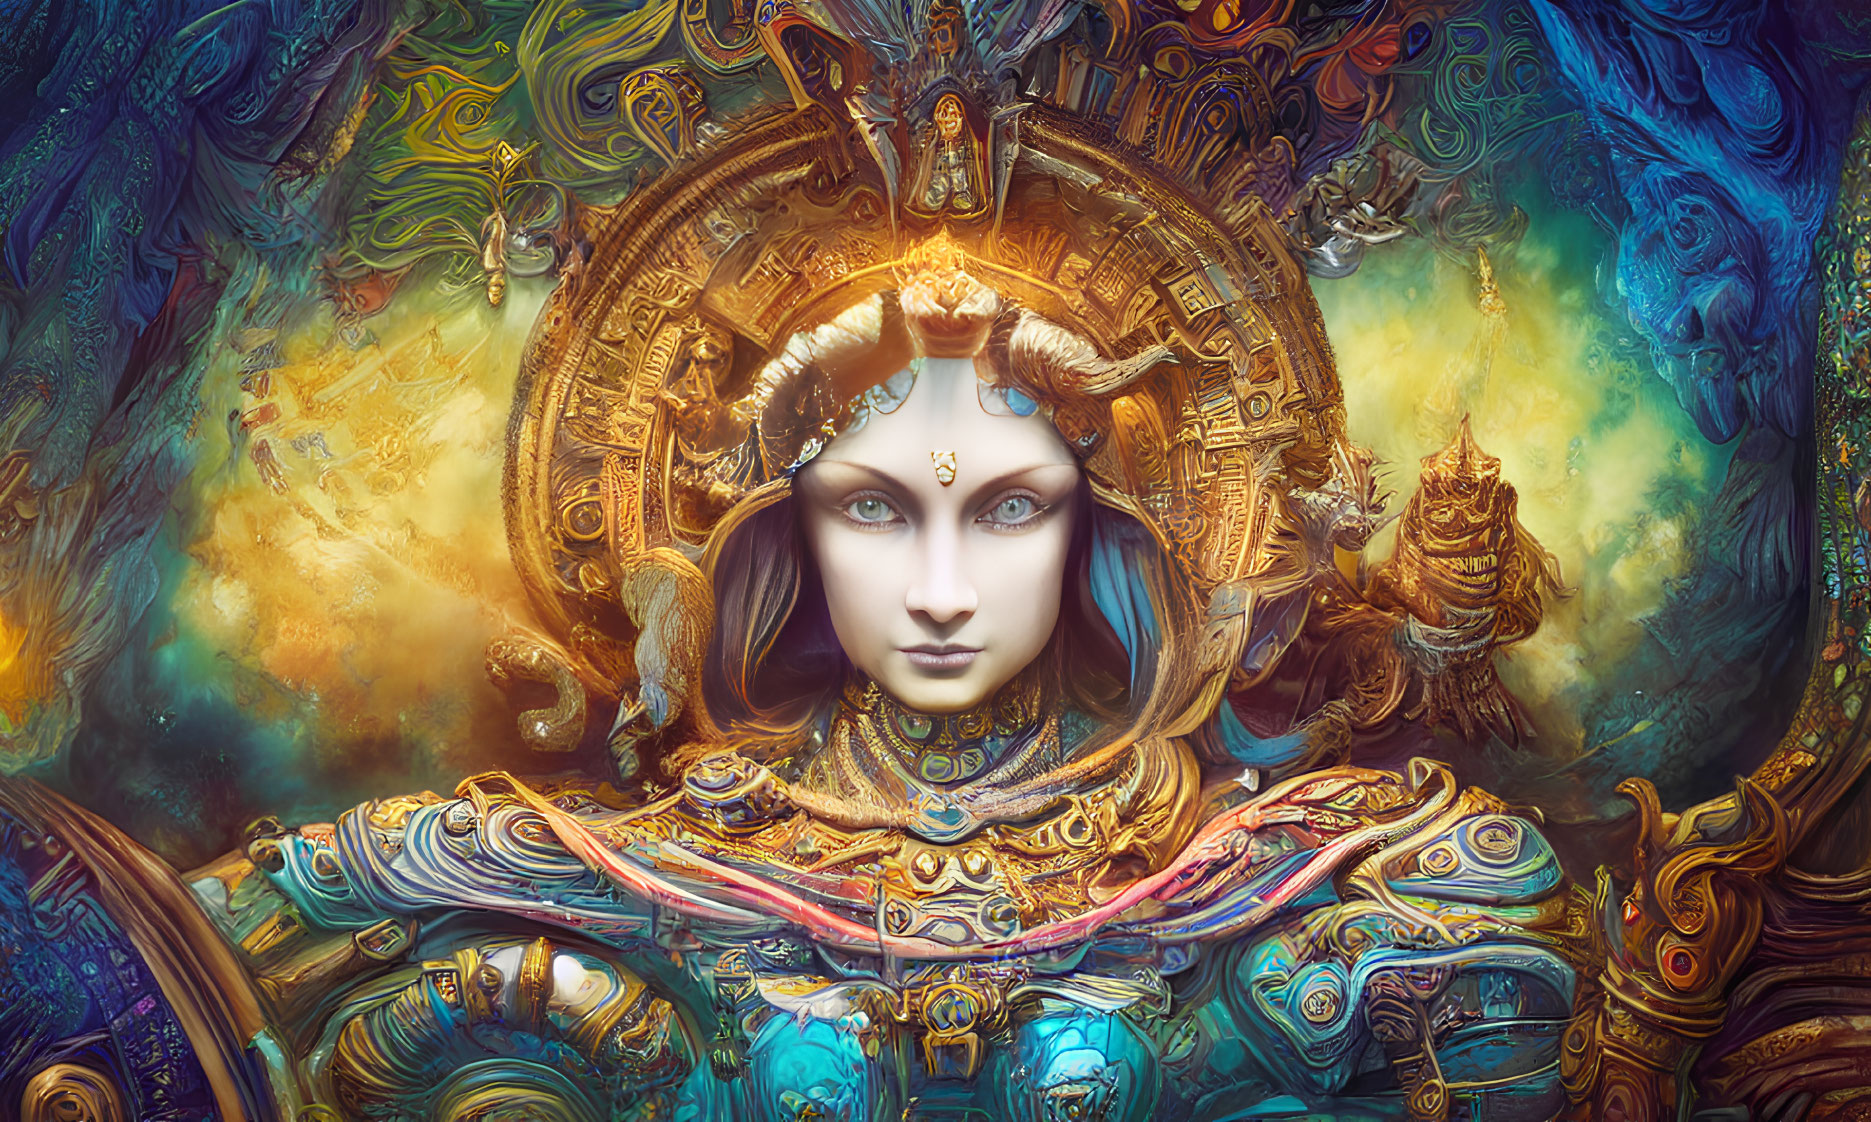 Colorful artwork of deity with multiple arms and halo in intricate design.